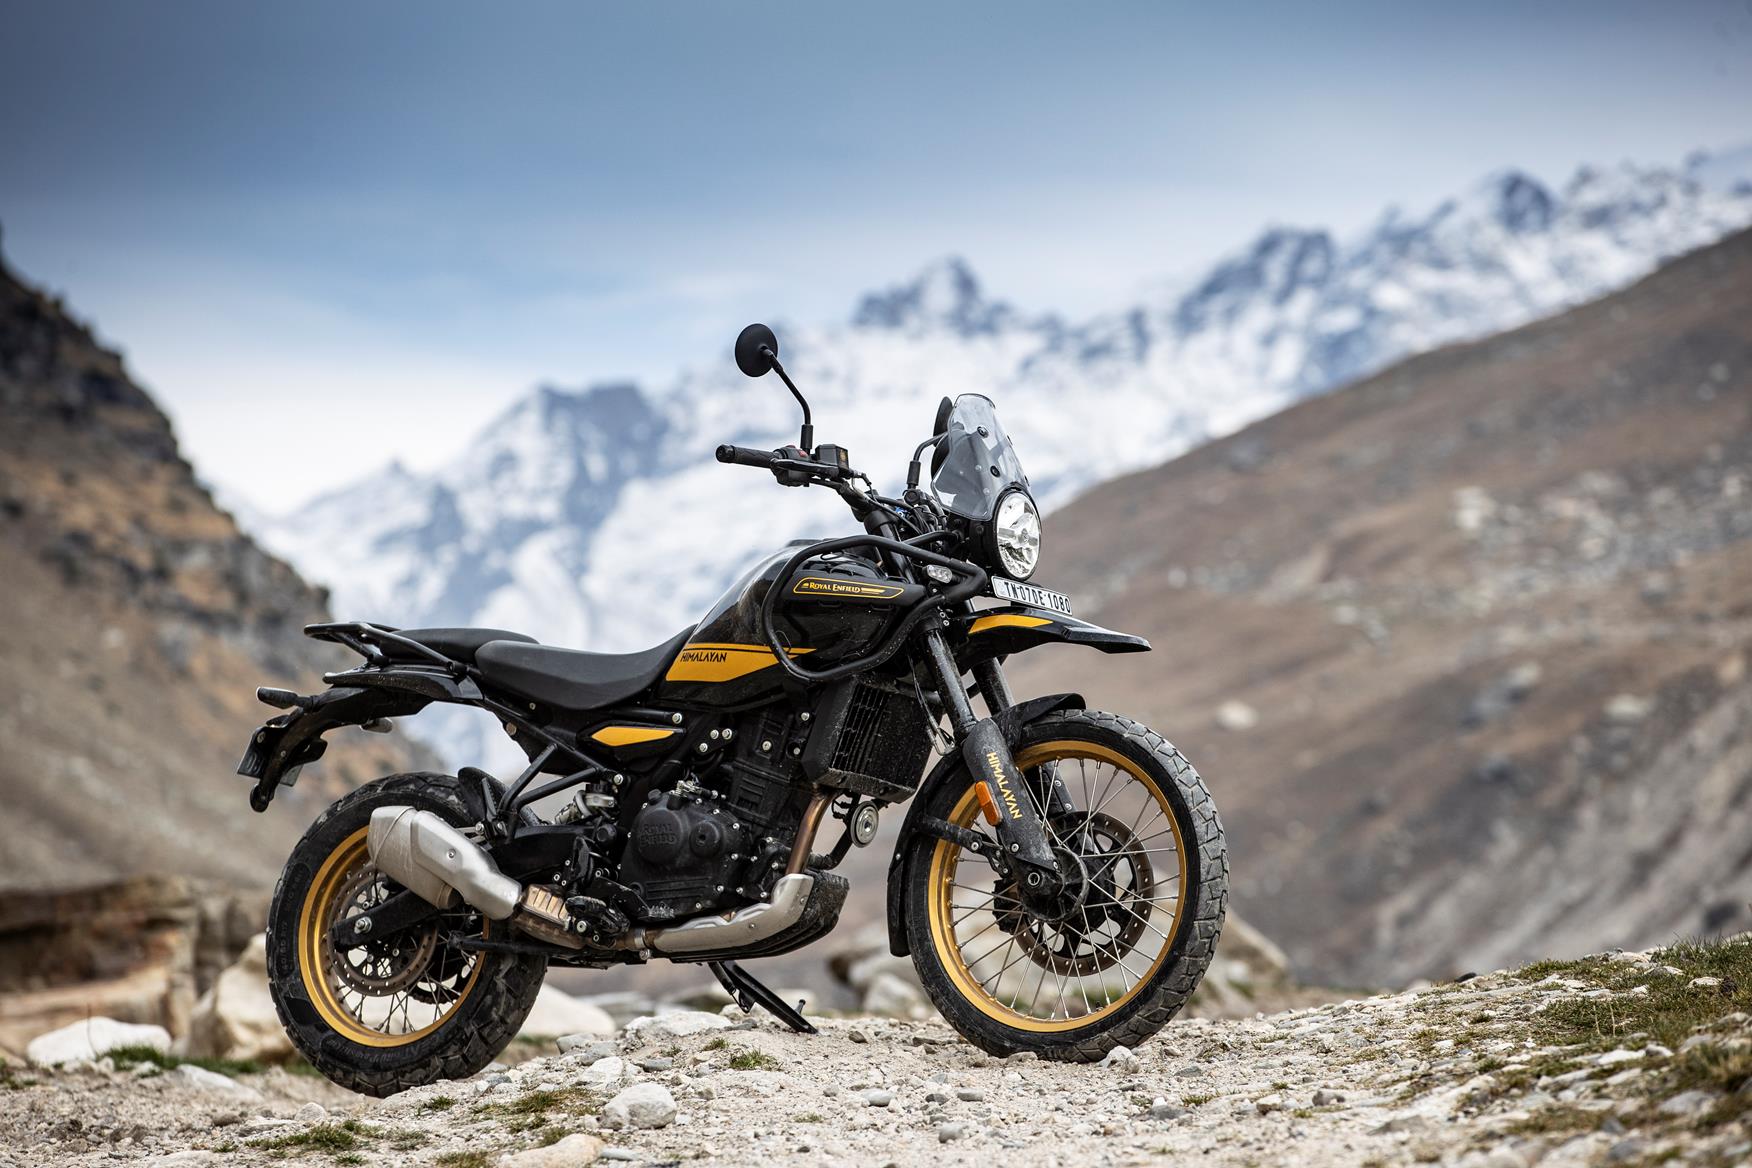 RE Himalayan 410 Price, Colours, Images & Mileage in UK